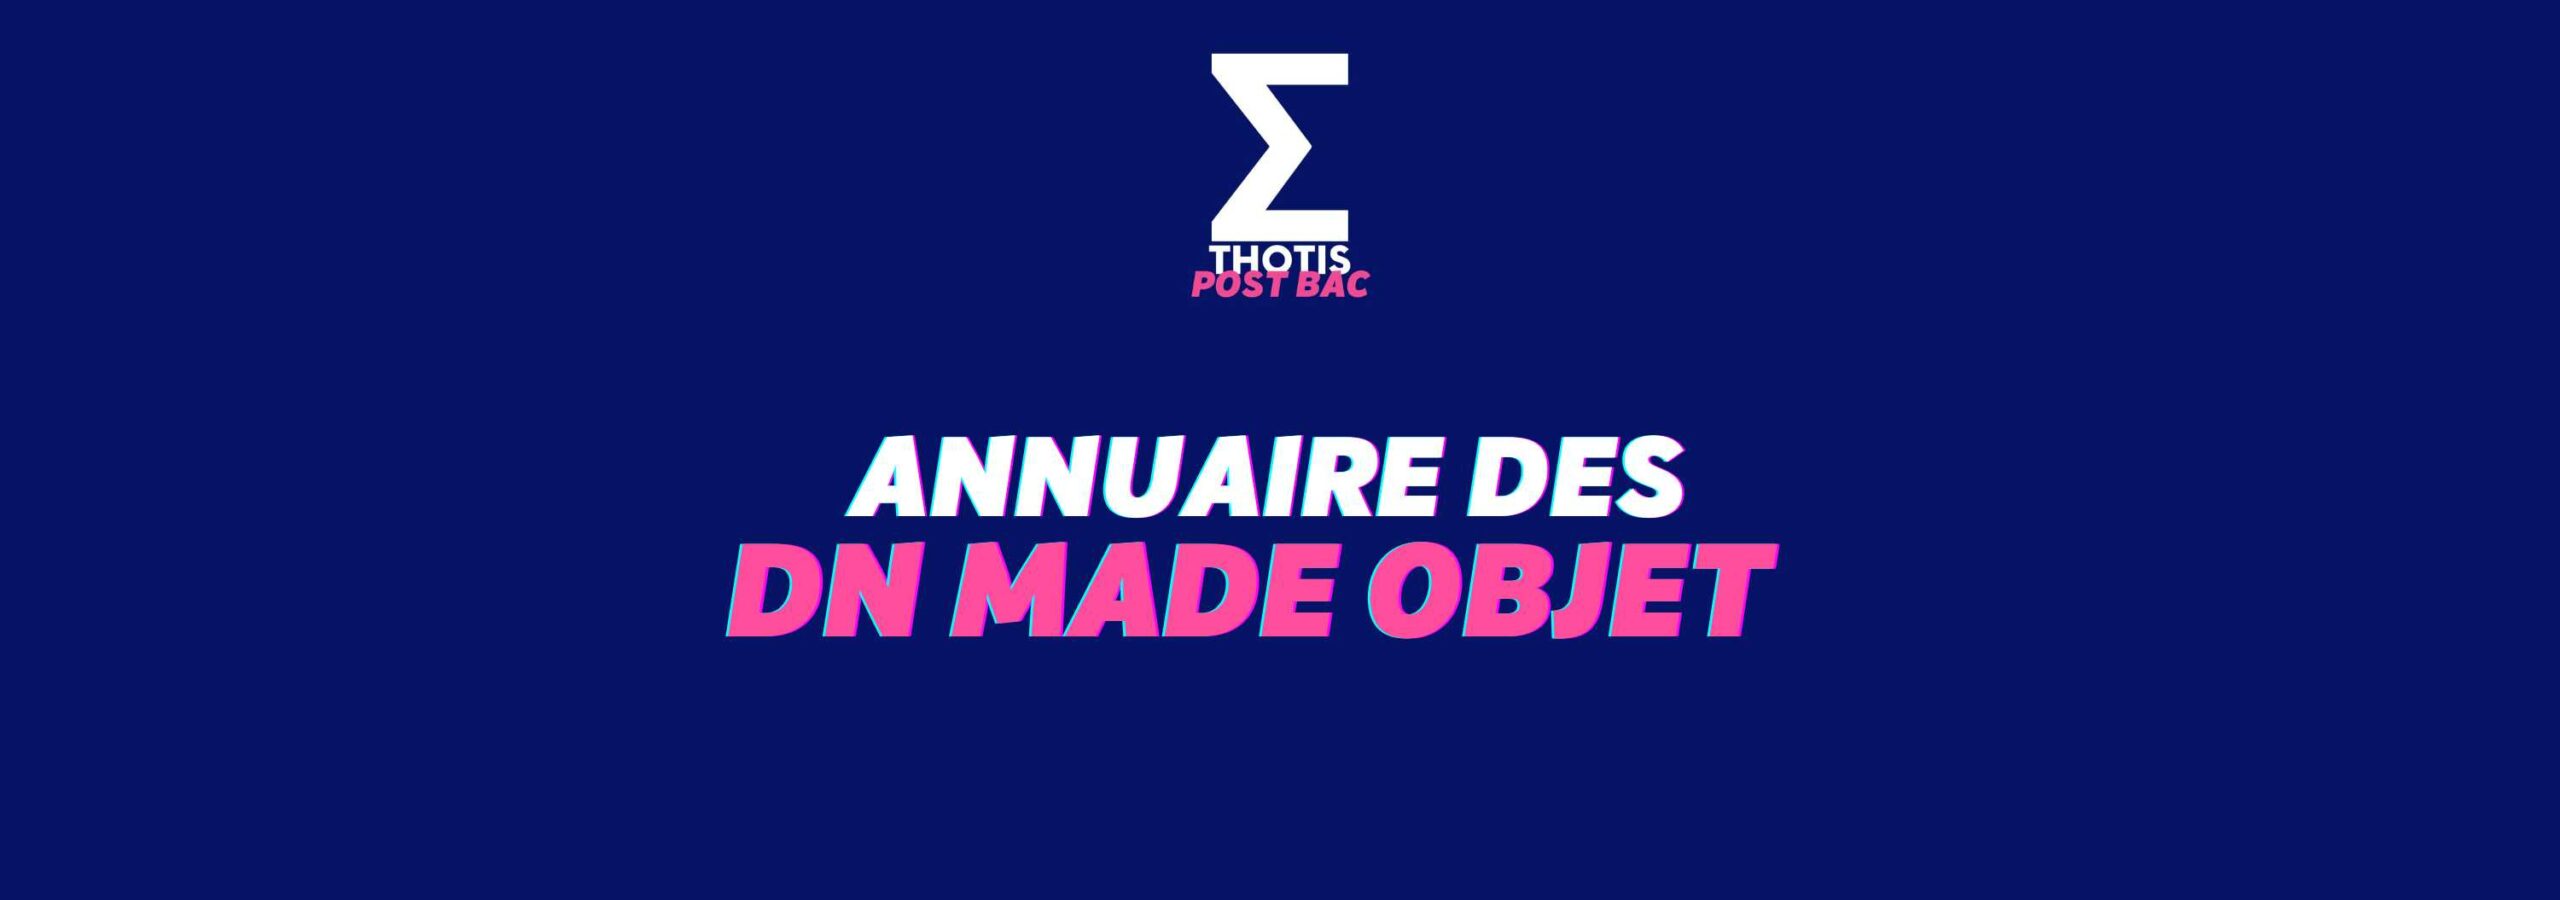 Annuaire des DN MADE objet